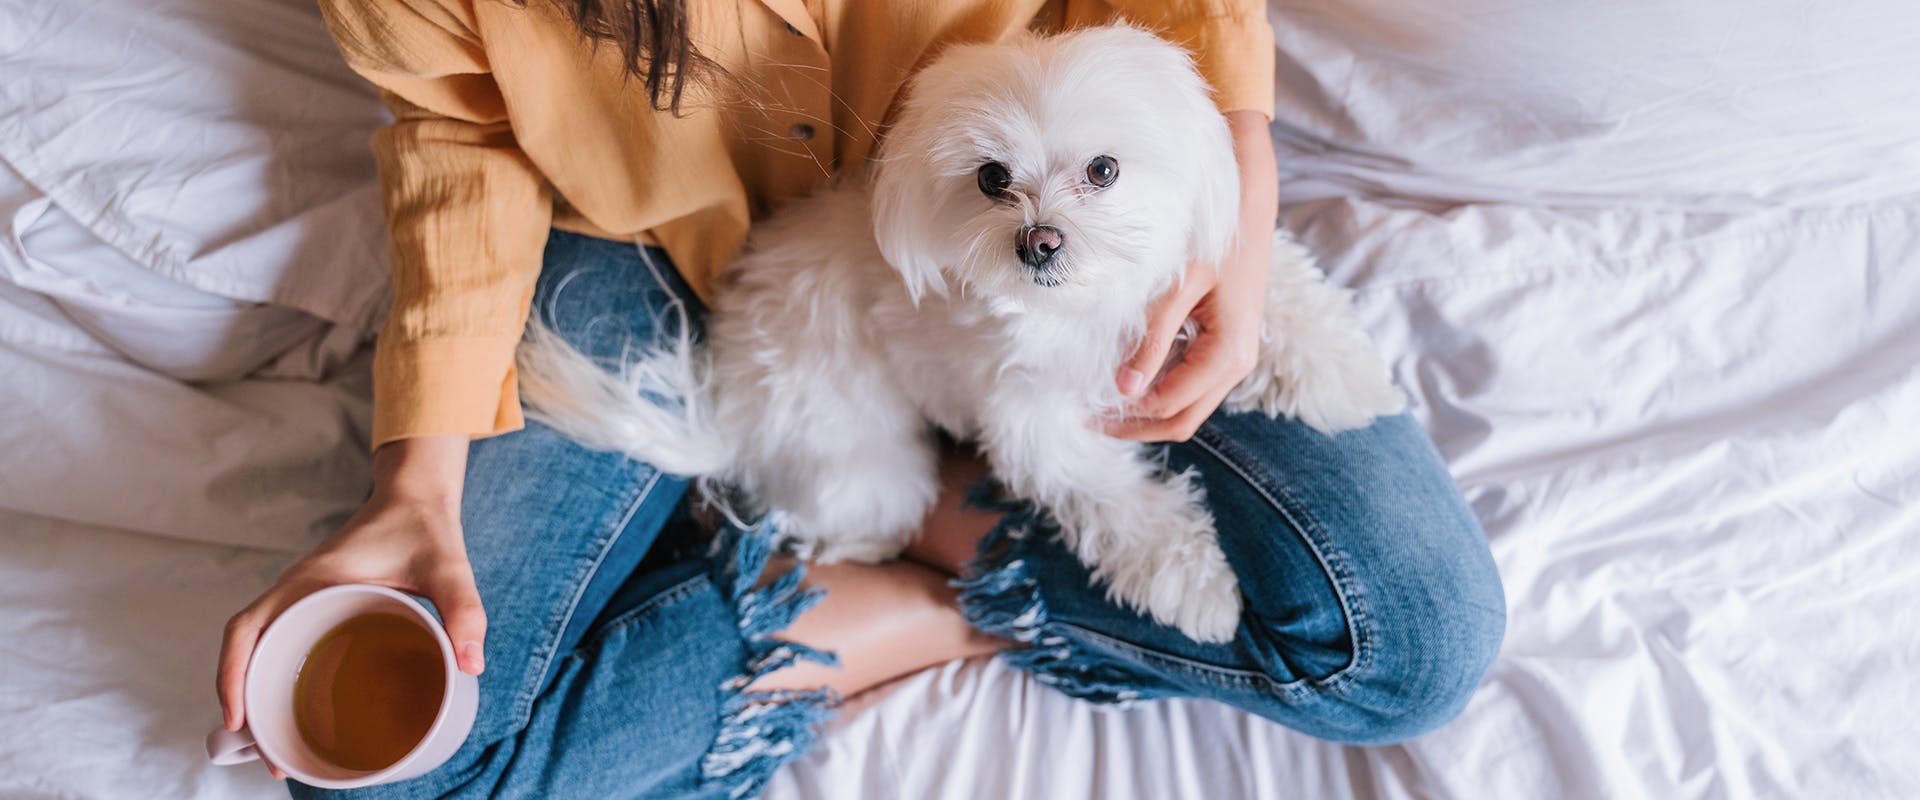 A woman sitting cross-legged on a bed, holding a cup of coffee in her right hand with a fluffy Maltese dog sitting on her lap